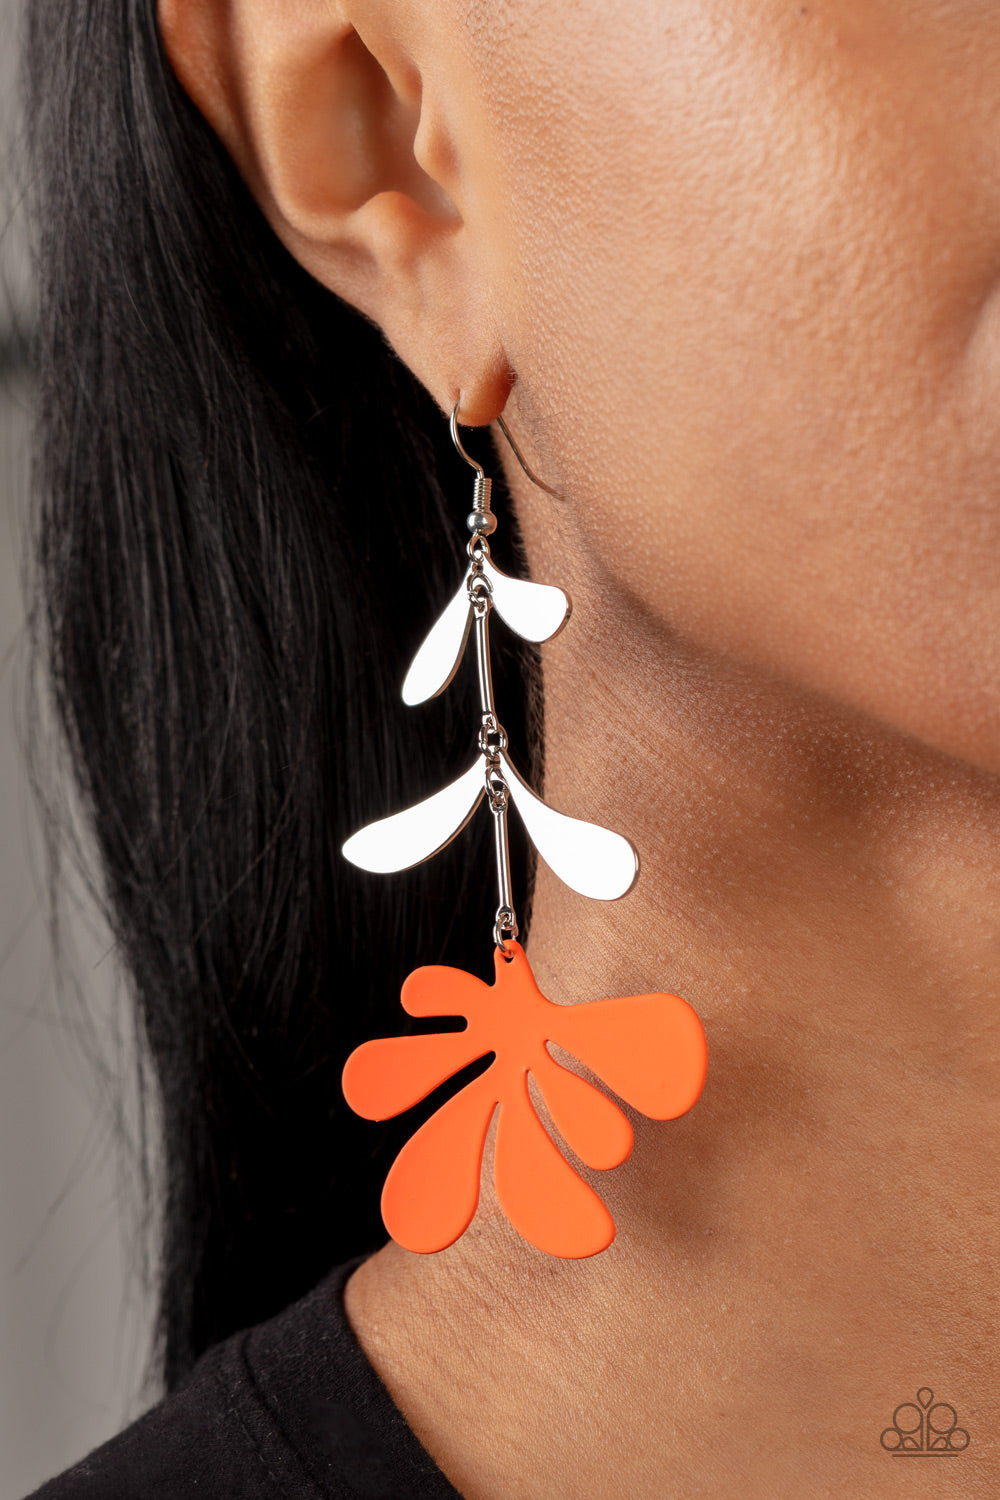 Palm Beach Bonanza - Orange Earrings painted in a lively matte orange, a fun metal palm leaf cut-out sways below two fanciful silver leaves separated by simple silver rods for a whimsical lure. Earring attaches to a standard fishhook fitting.  Sold as one pair of earrings.